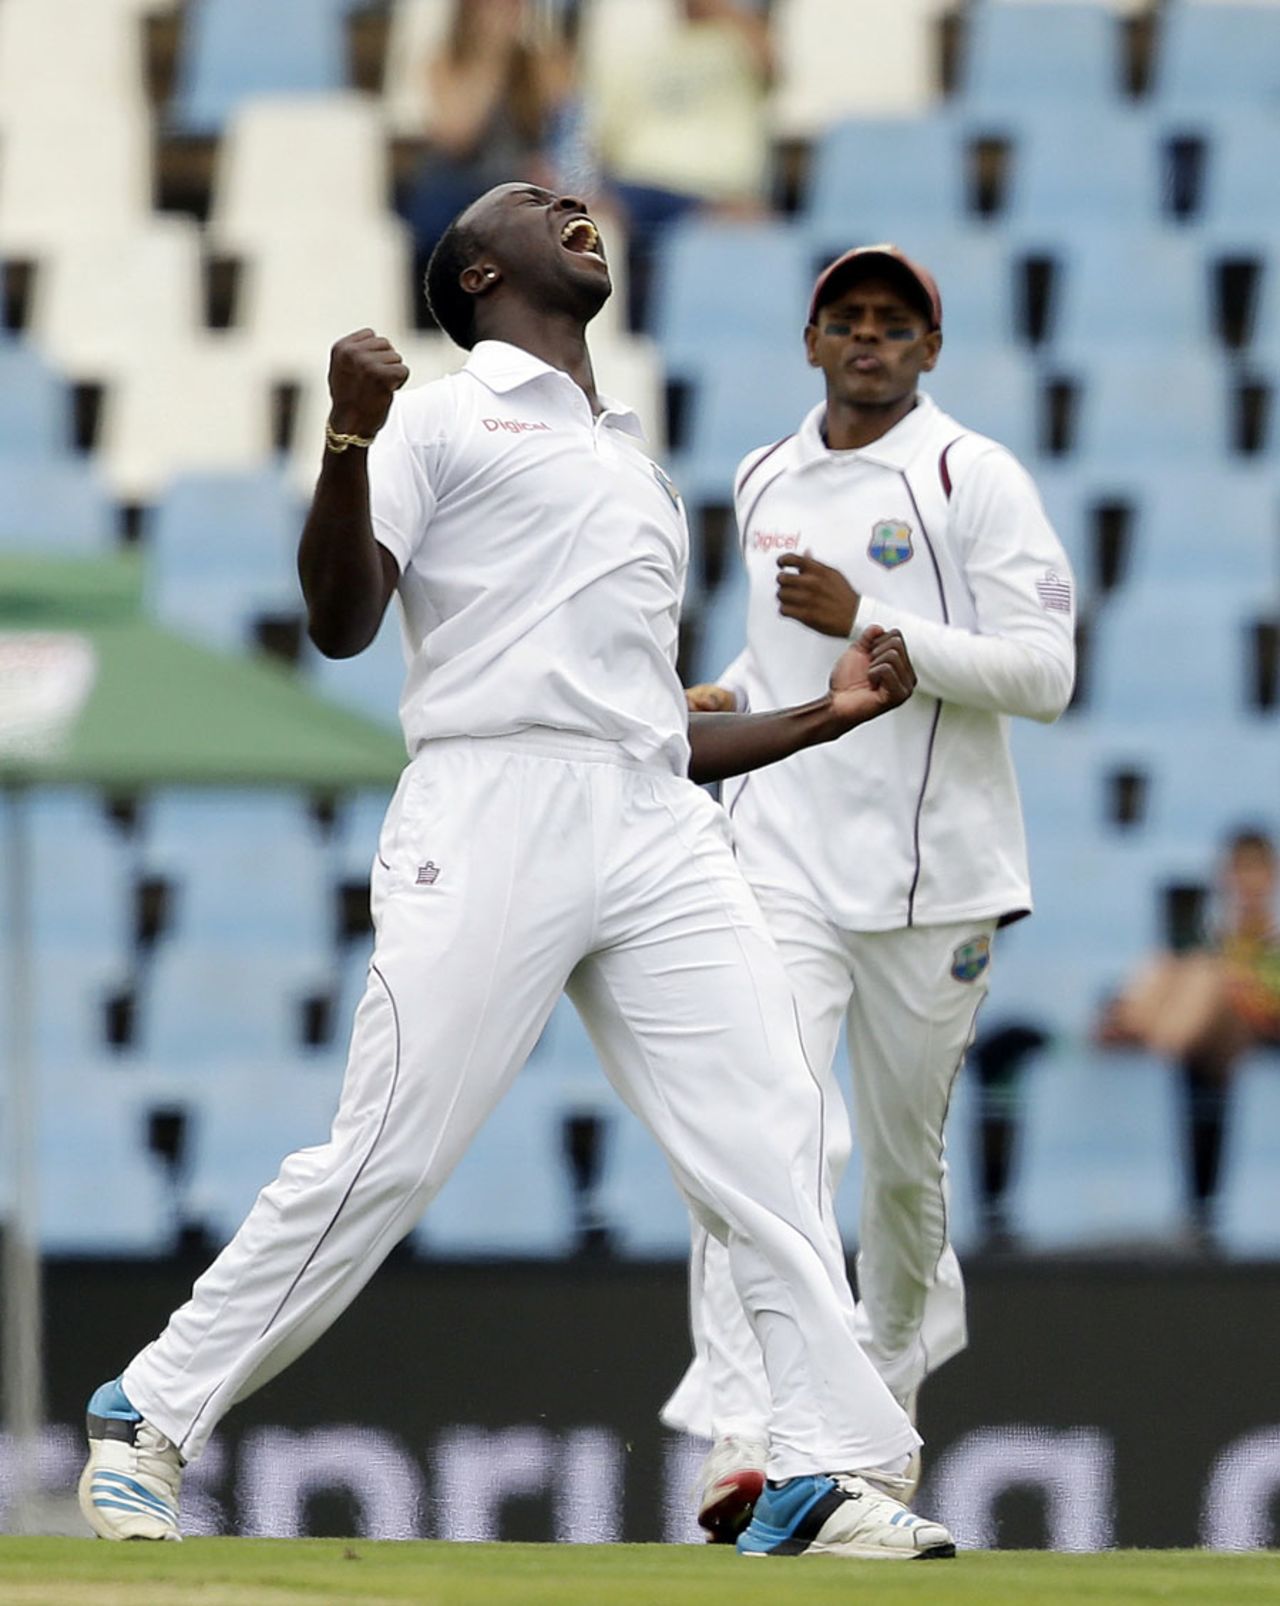 Kemar Roach brought West Indies to life on the first morning, South Africa v West Indies, 1st Test, Centurion, 1st day, December 17, 2014